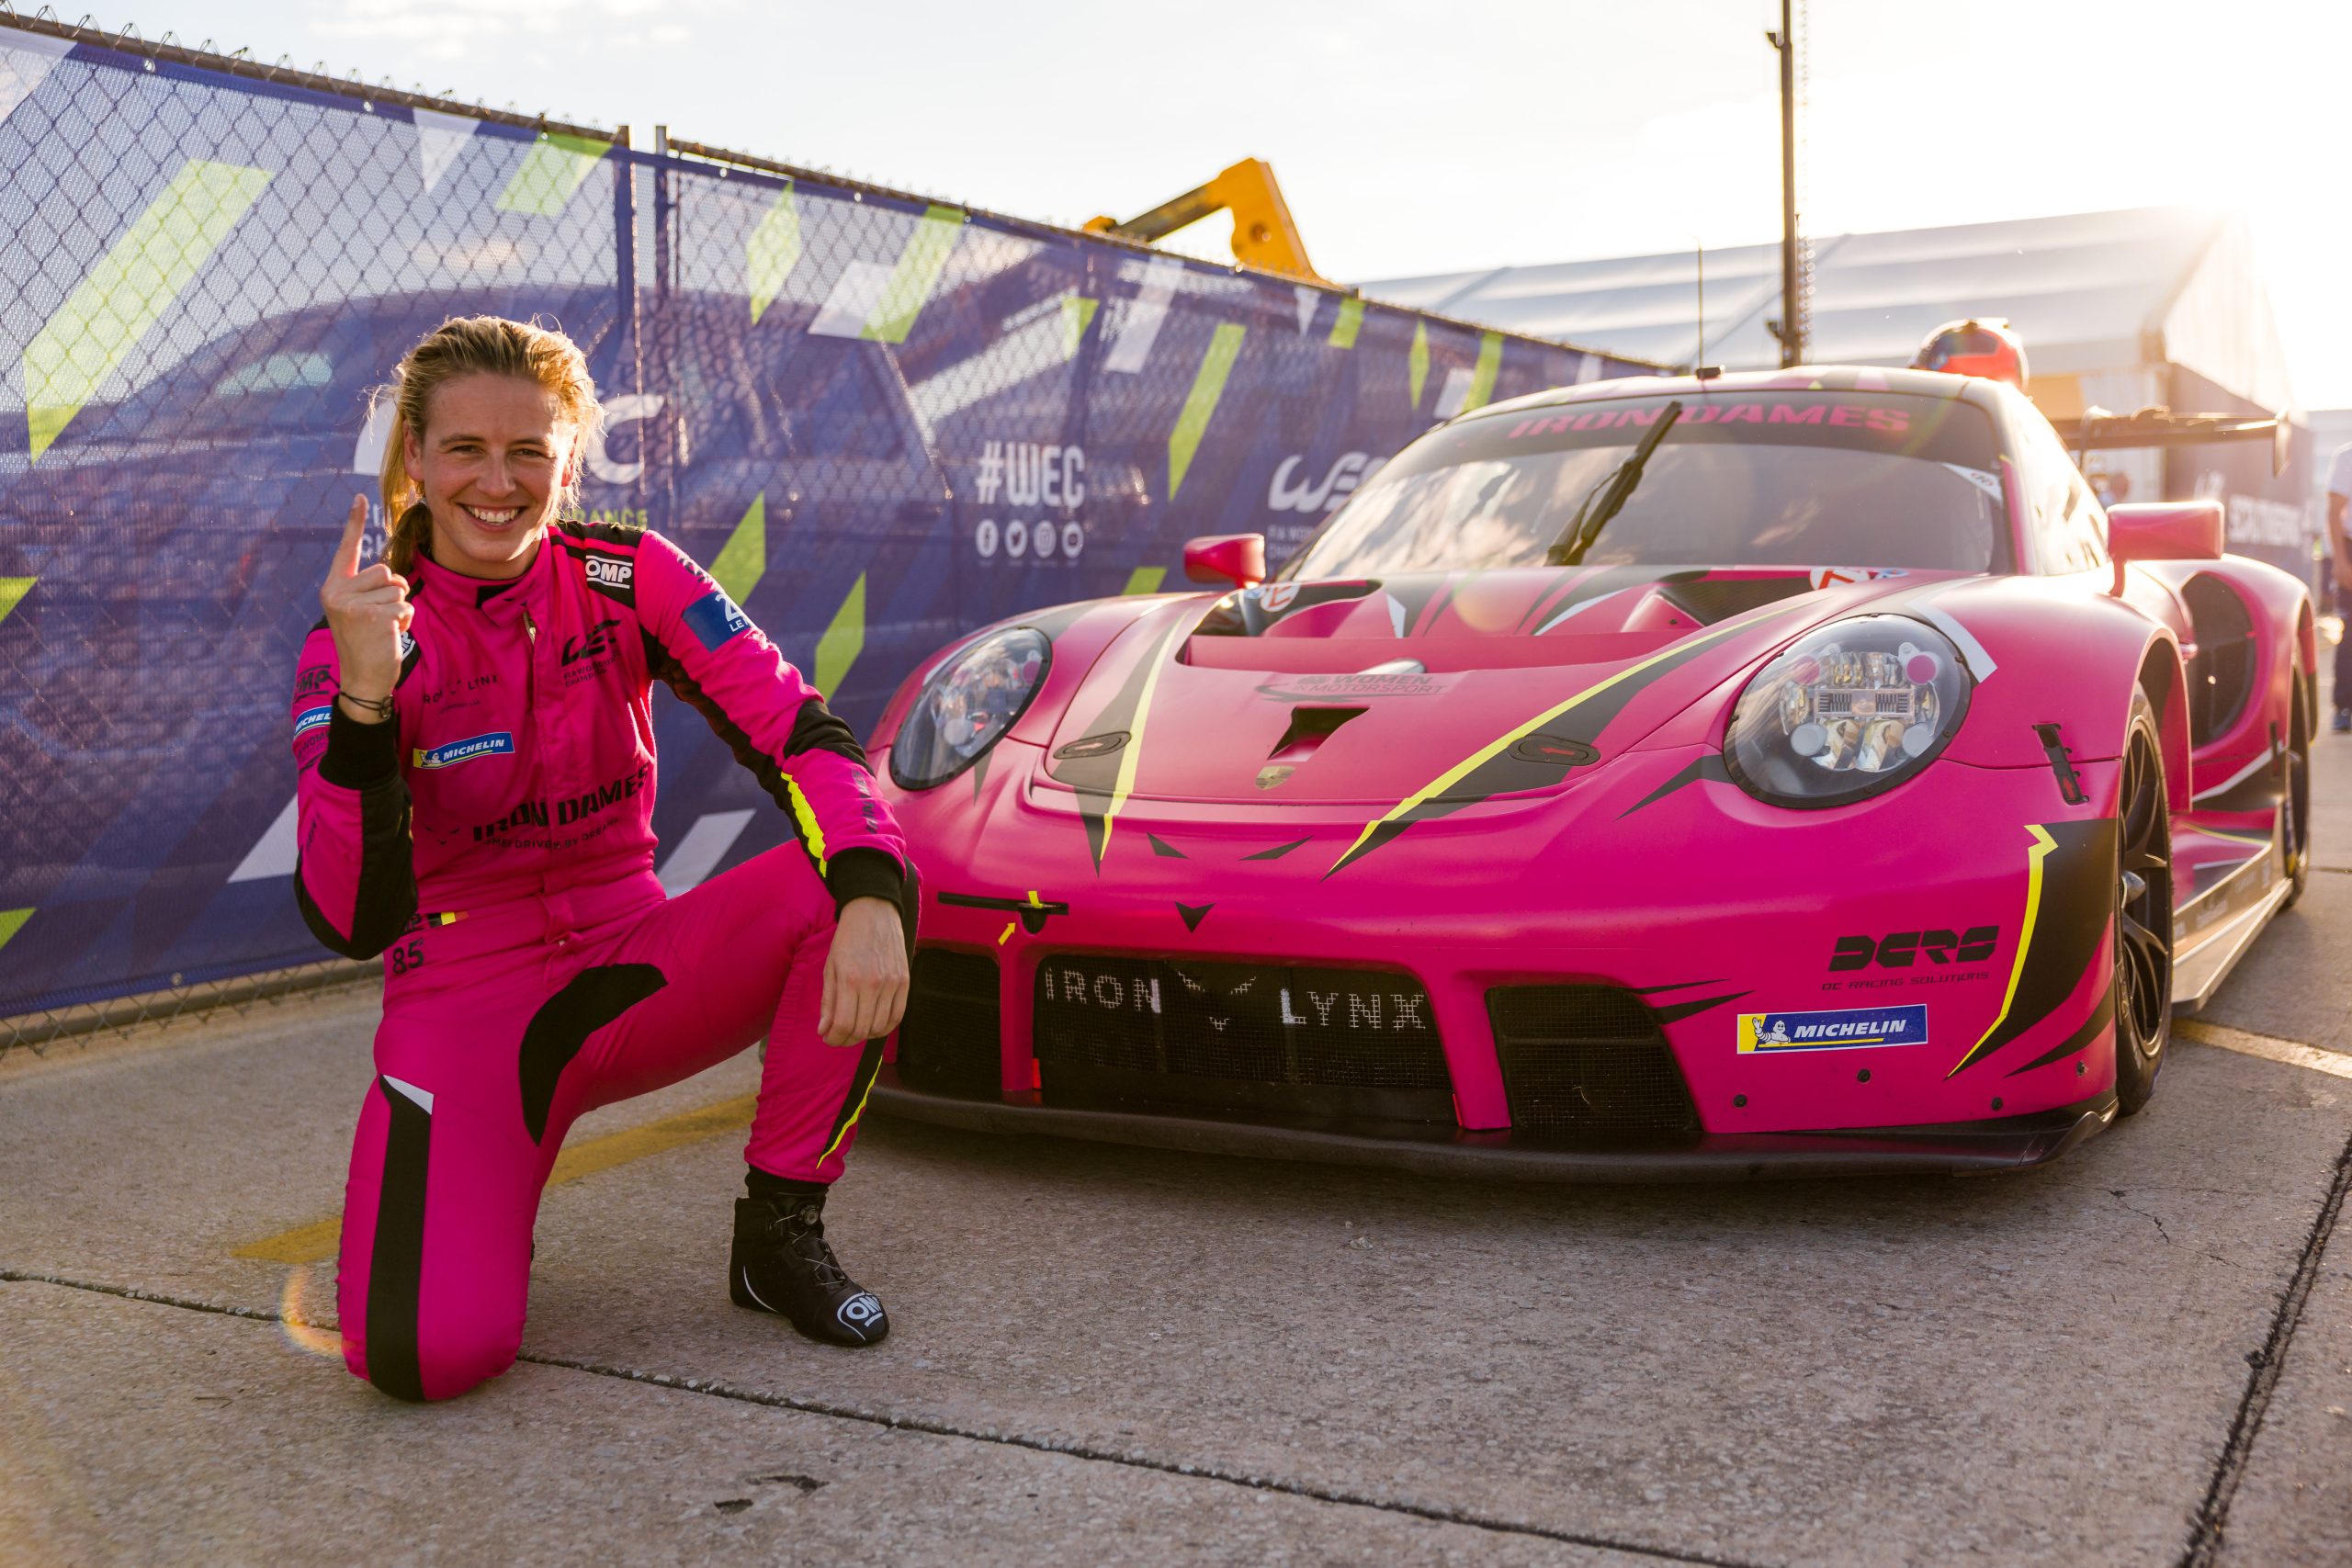 Iron Dames take pole position for the FIA WEC 1000 Miles of Sebring